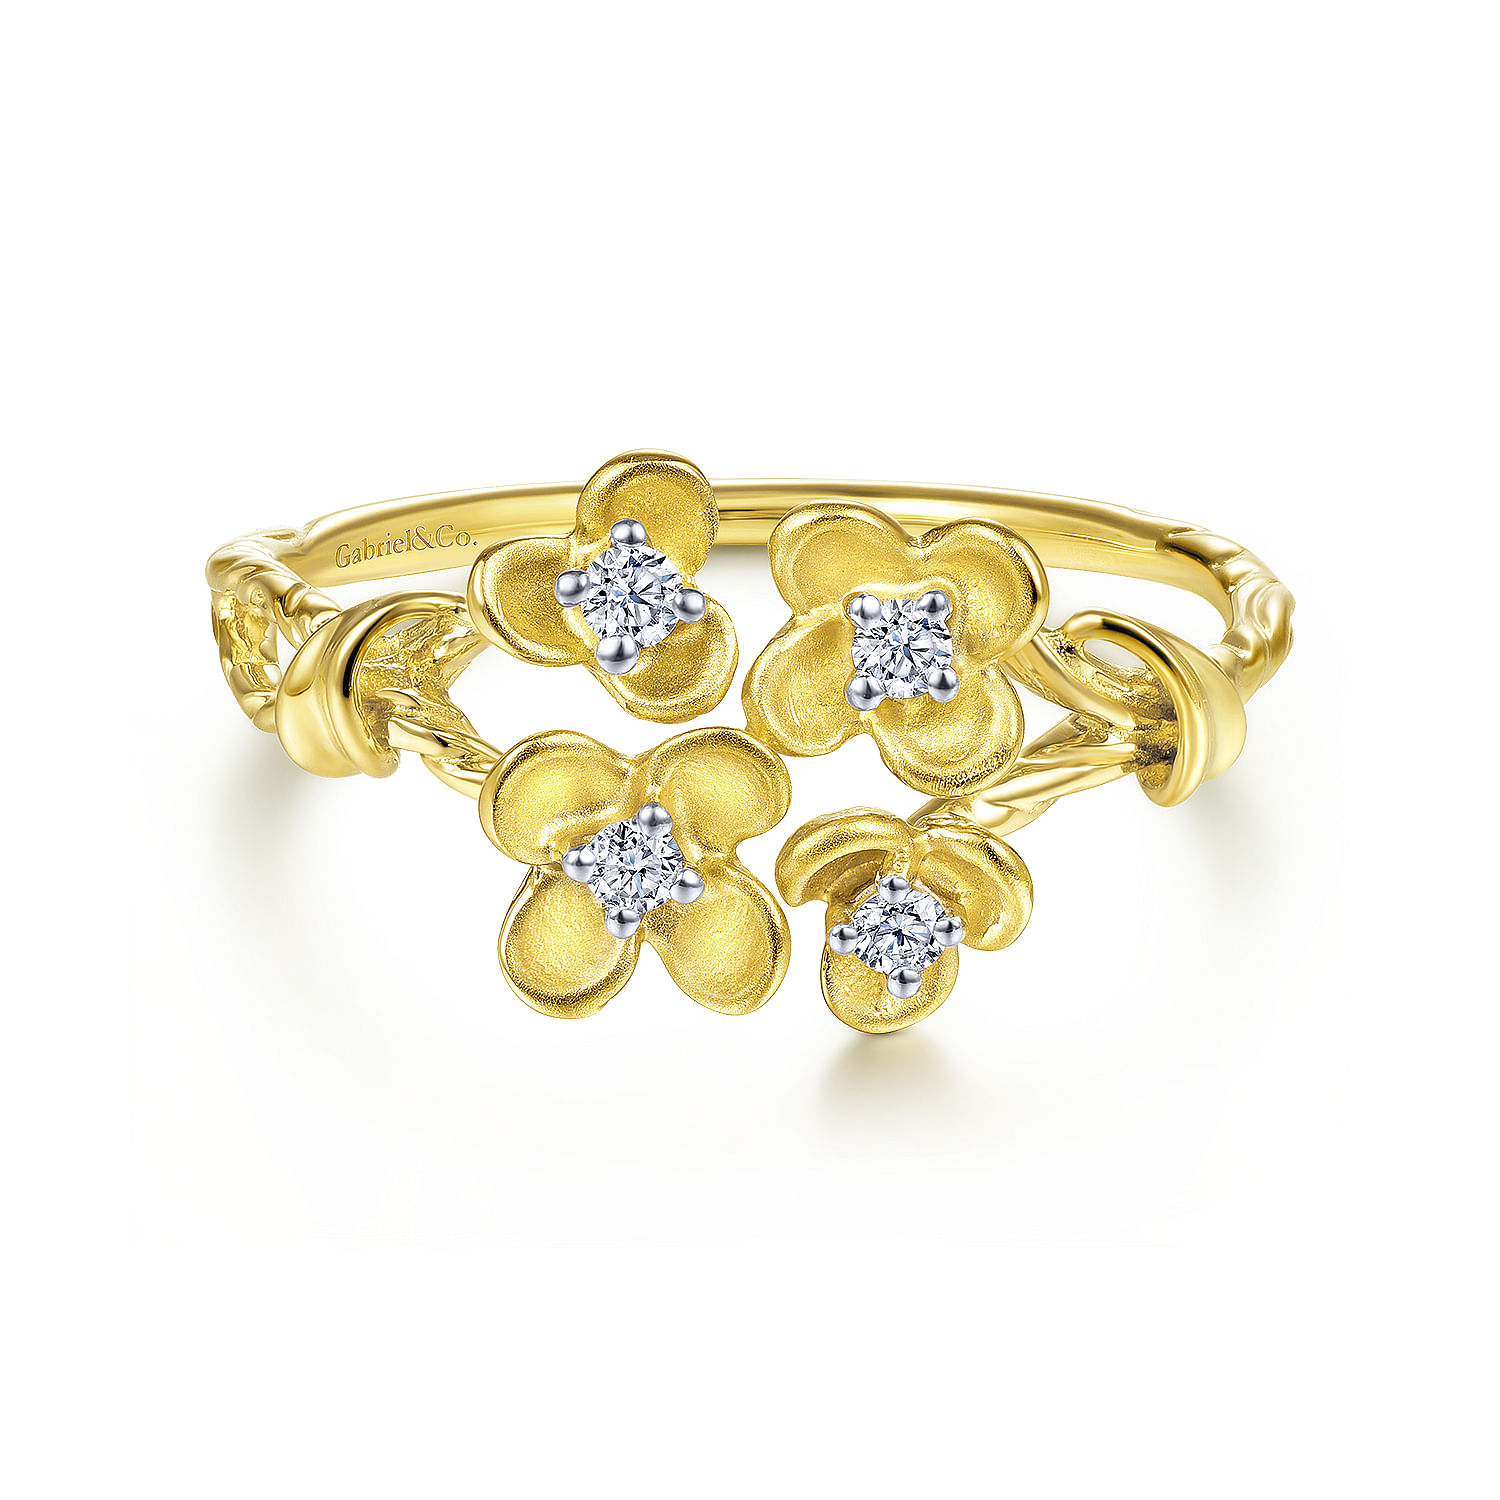 14K Yellow Gold Engraved Floral Diamond Ring